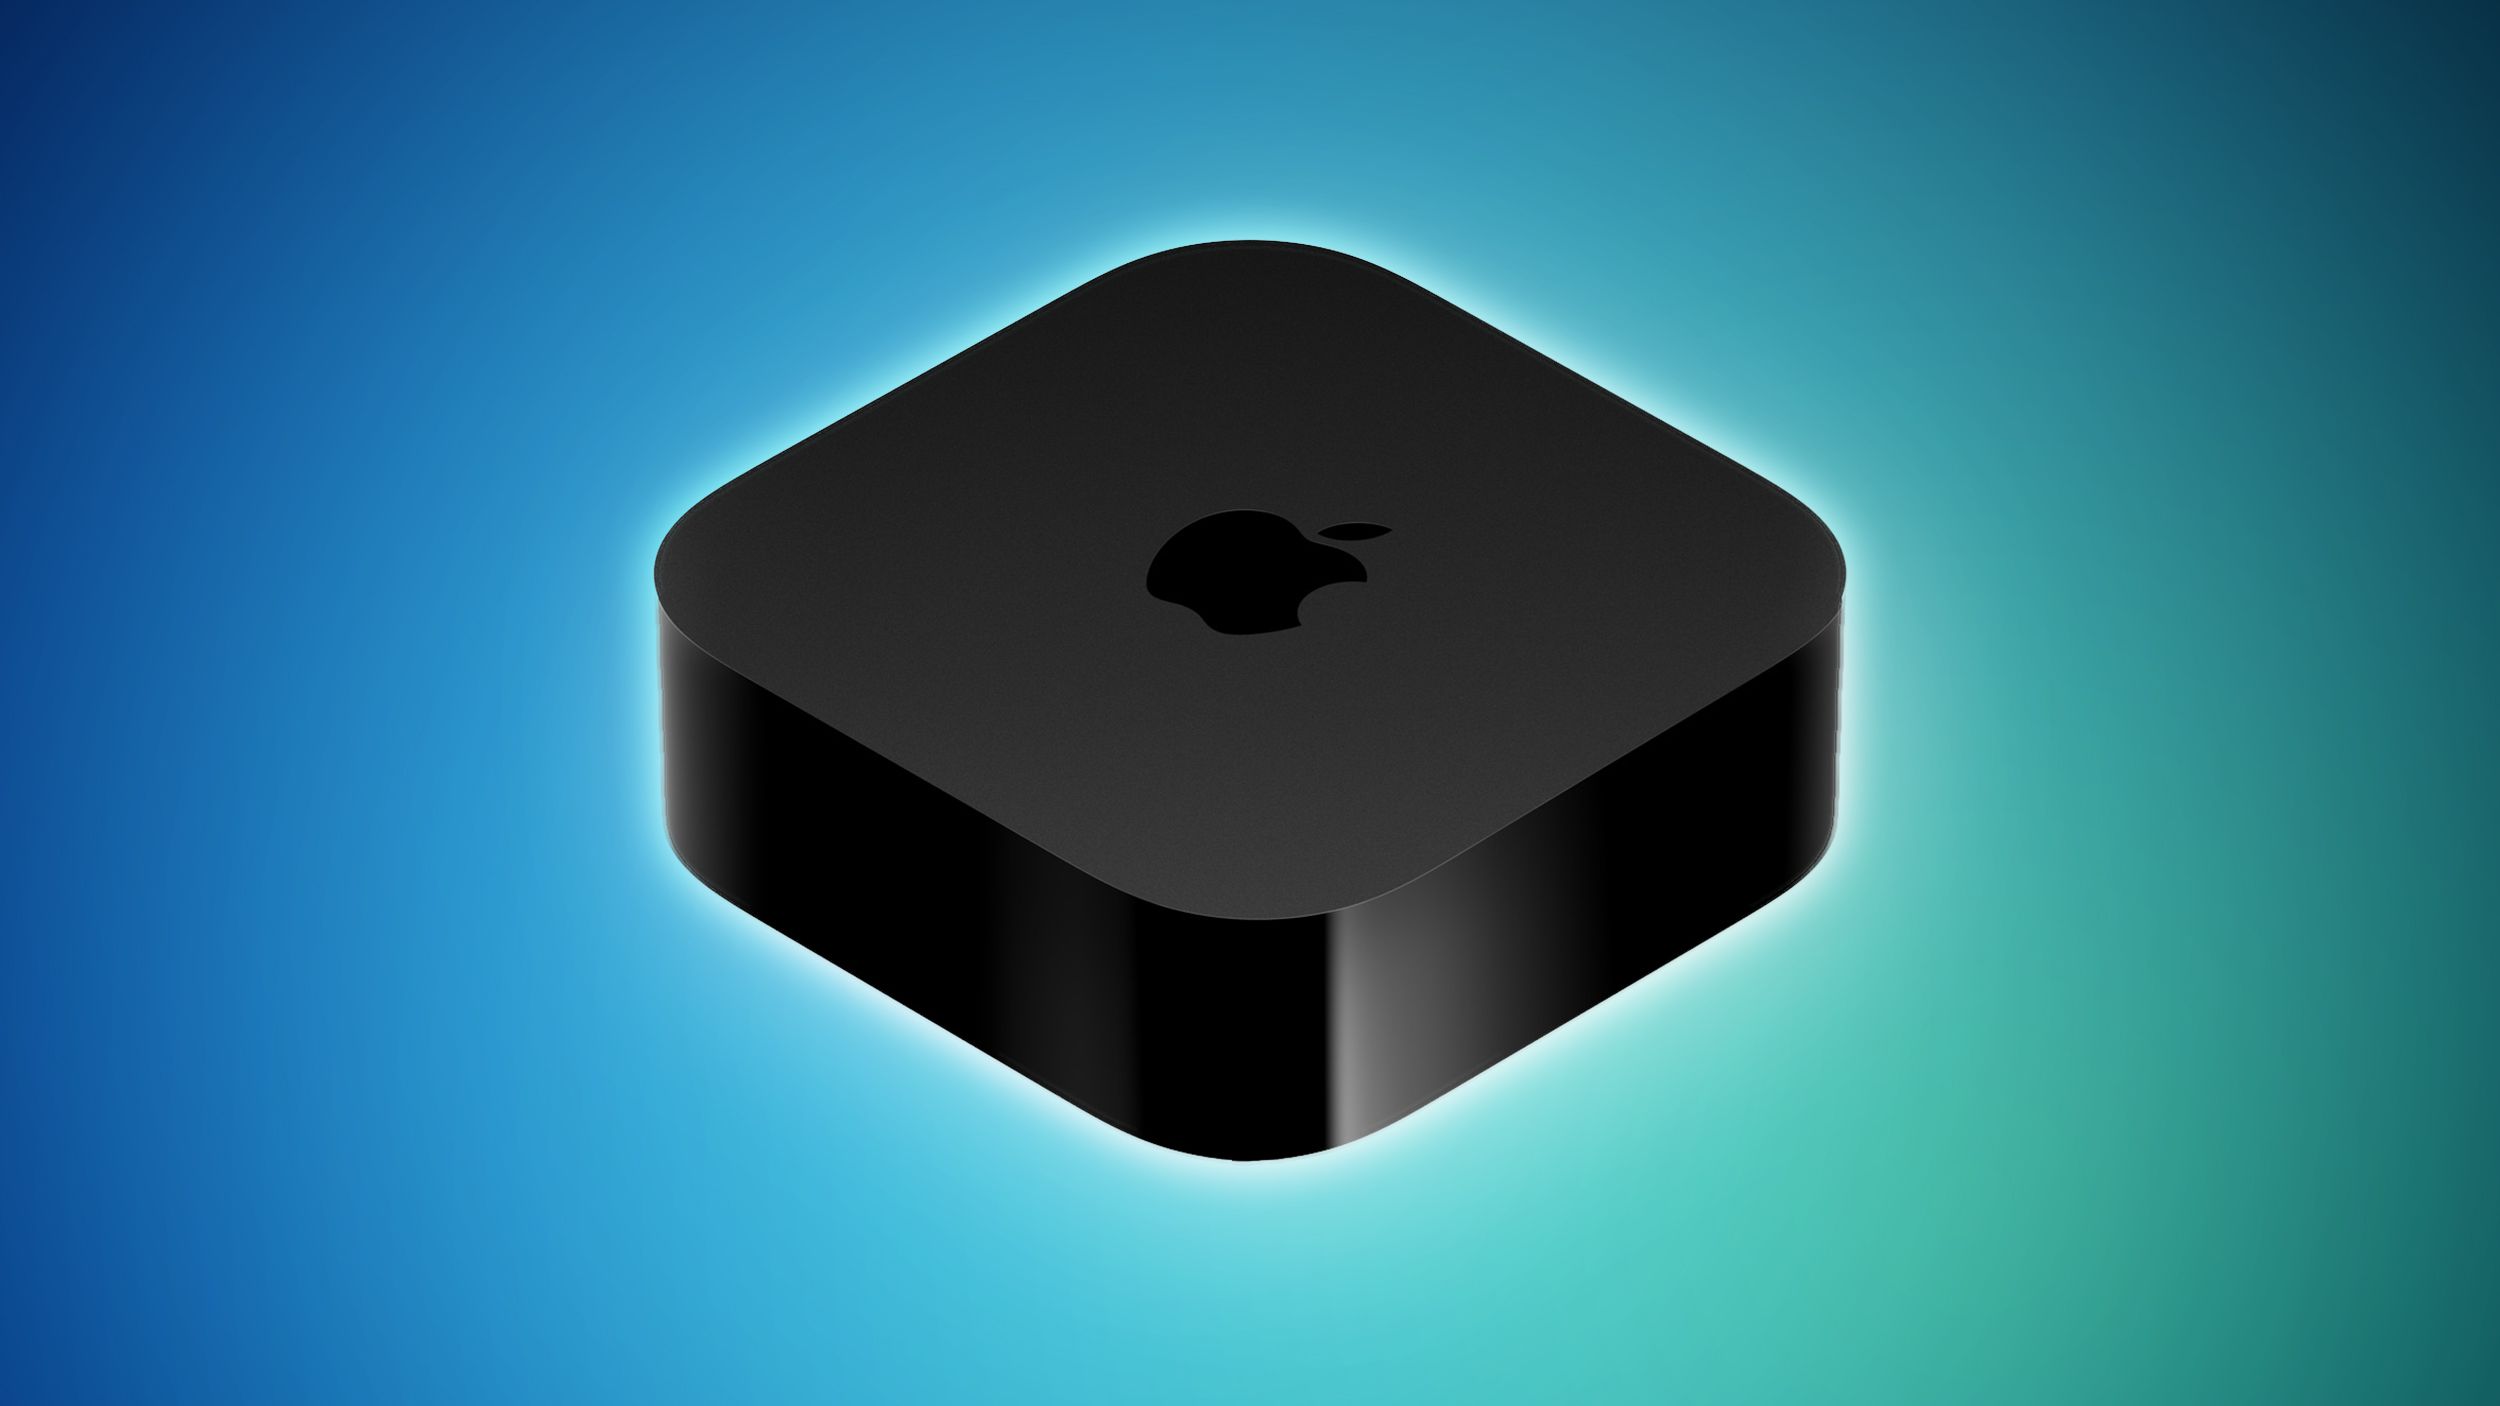 Apple TV: Should You Buy? Features, Reviews, and More